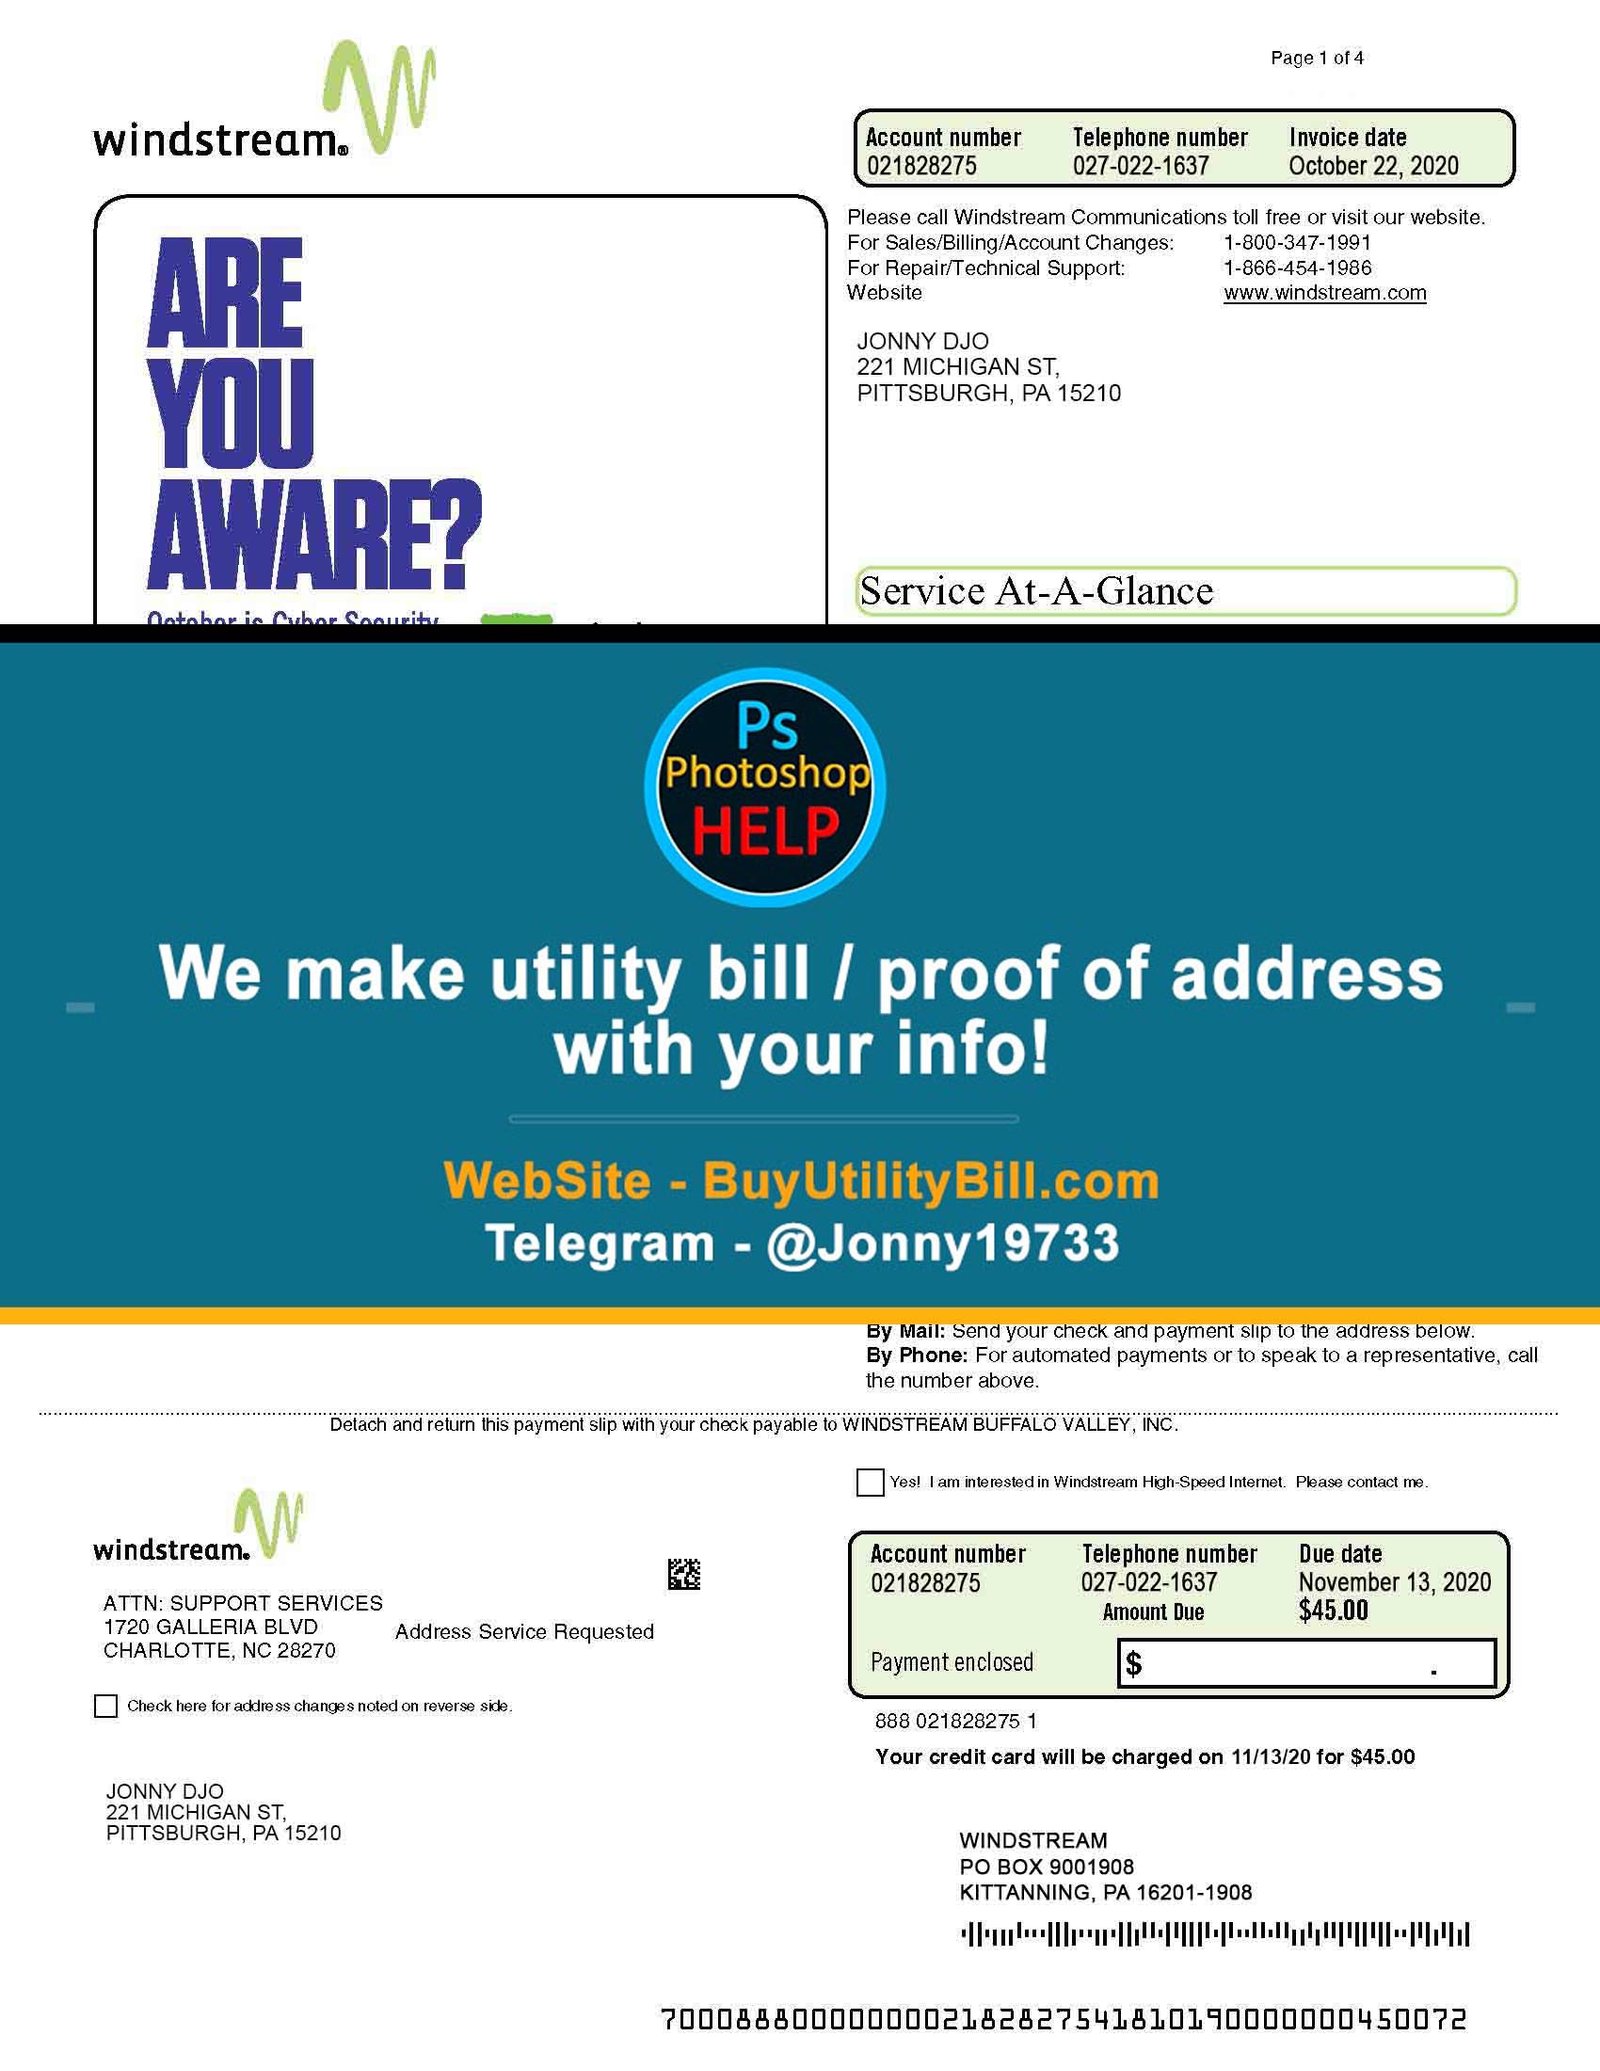 Pennsylvania Windstream for internet and networking Fake Utility bill